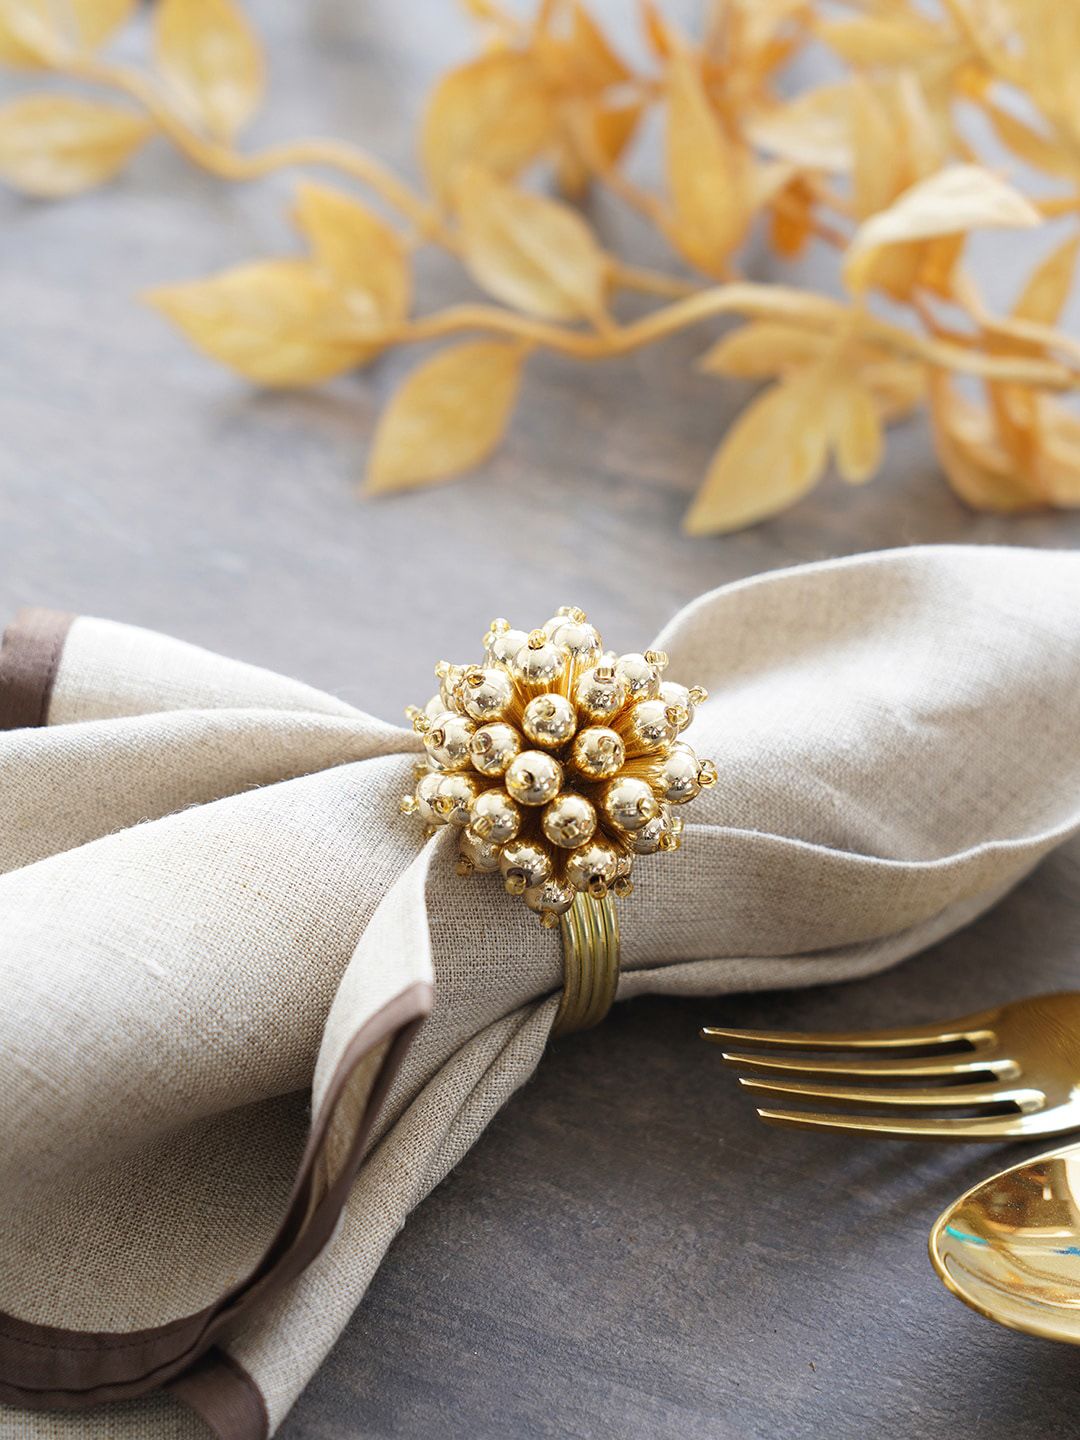 Pure Home and Living Set Of 4 Gold-Toned Table Napkin Rings Price in India